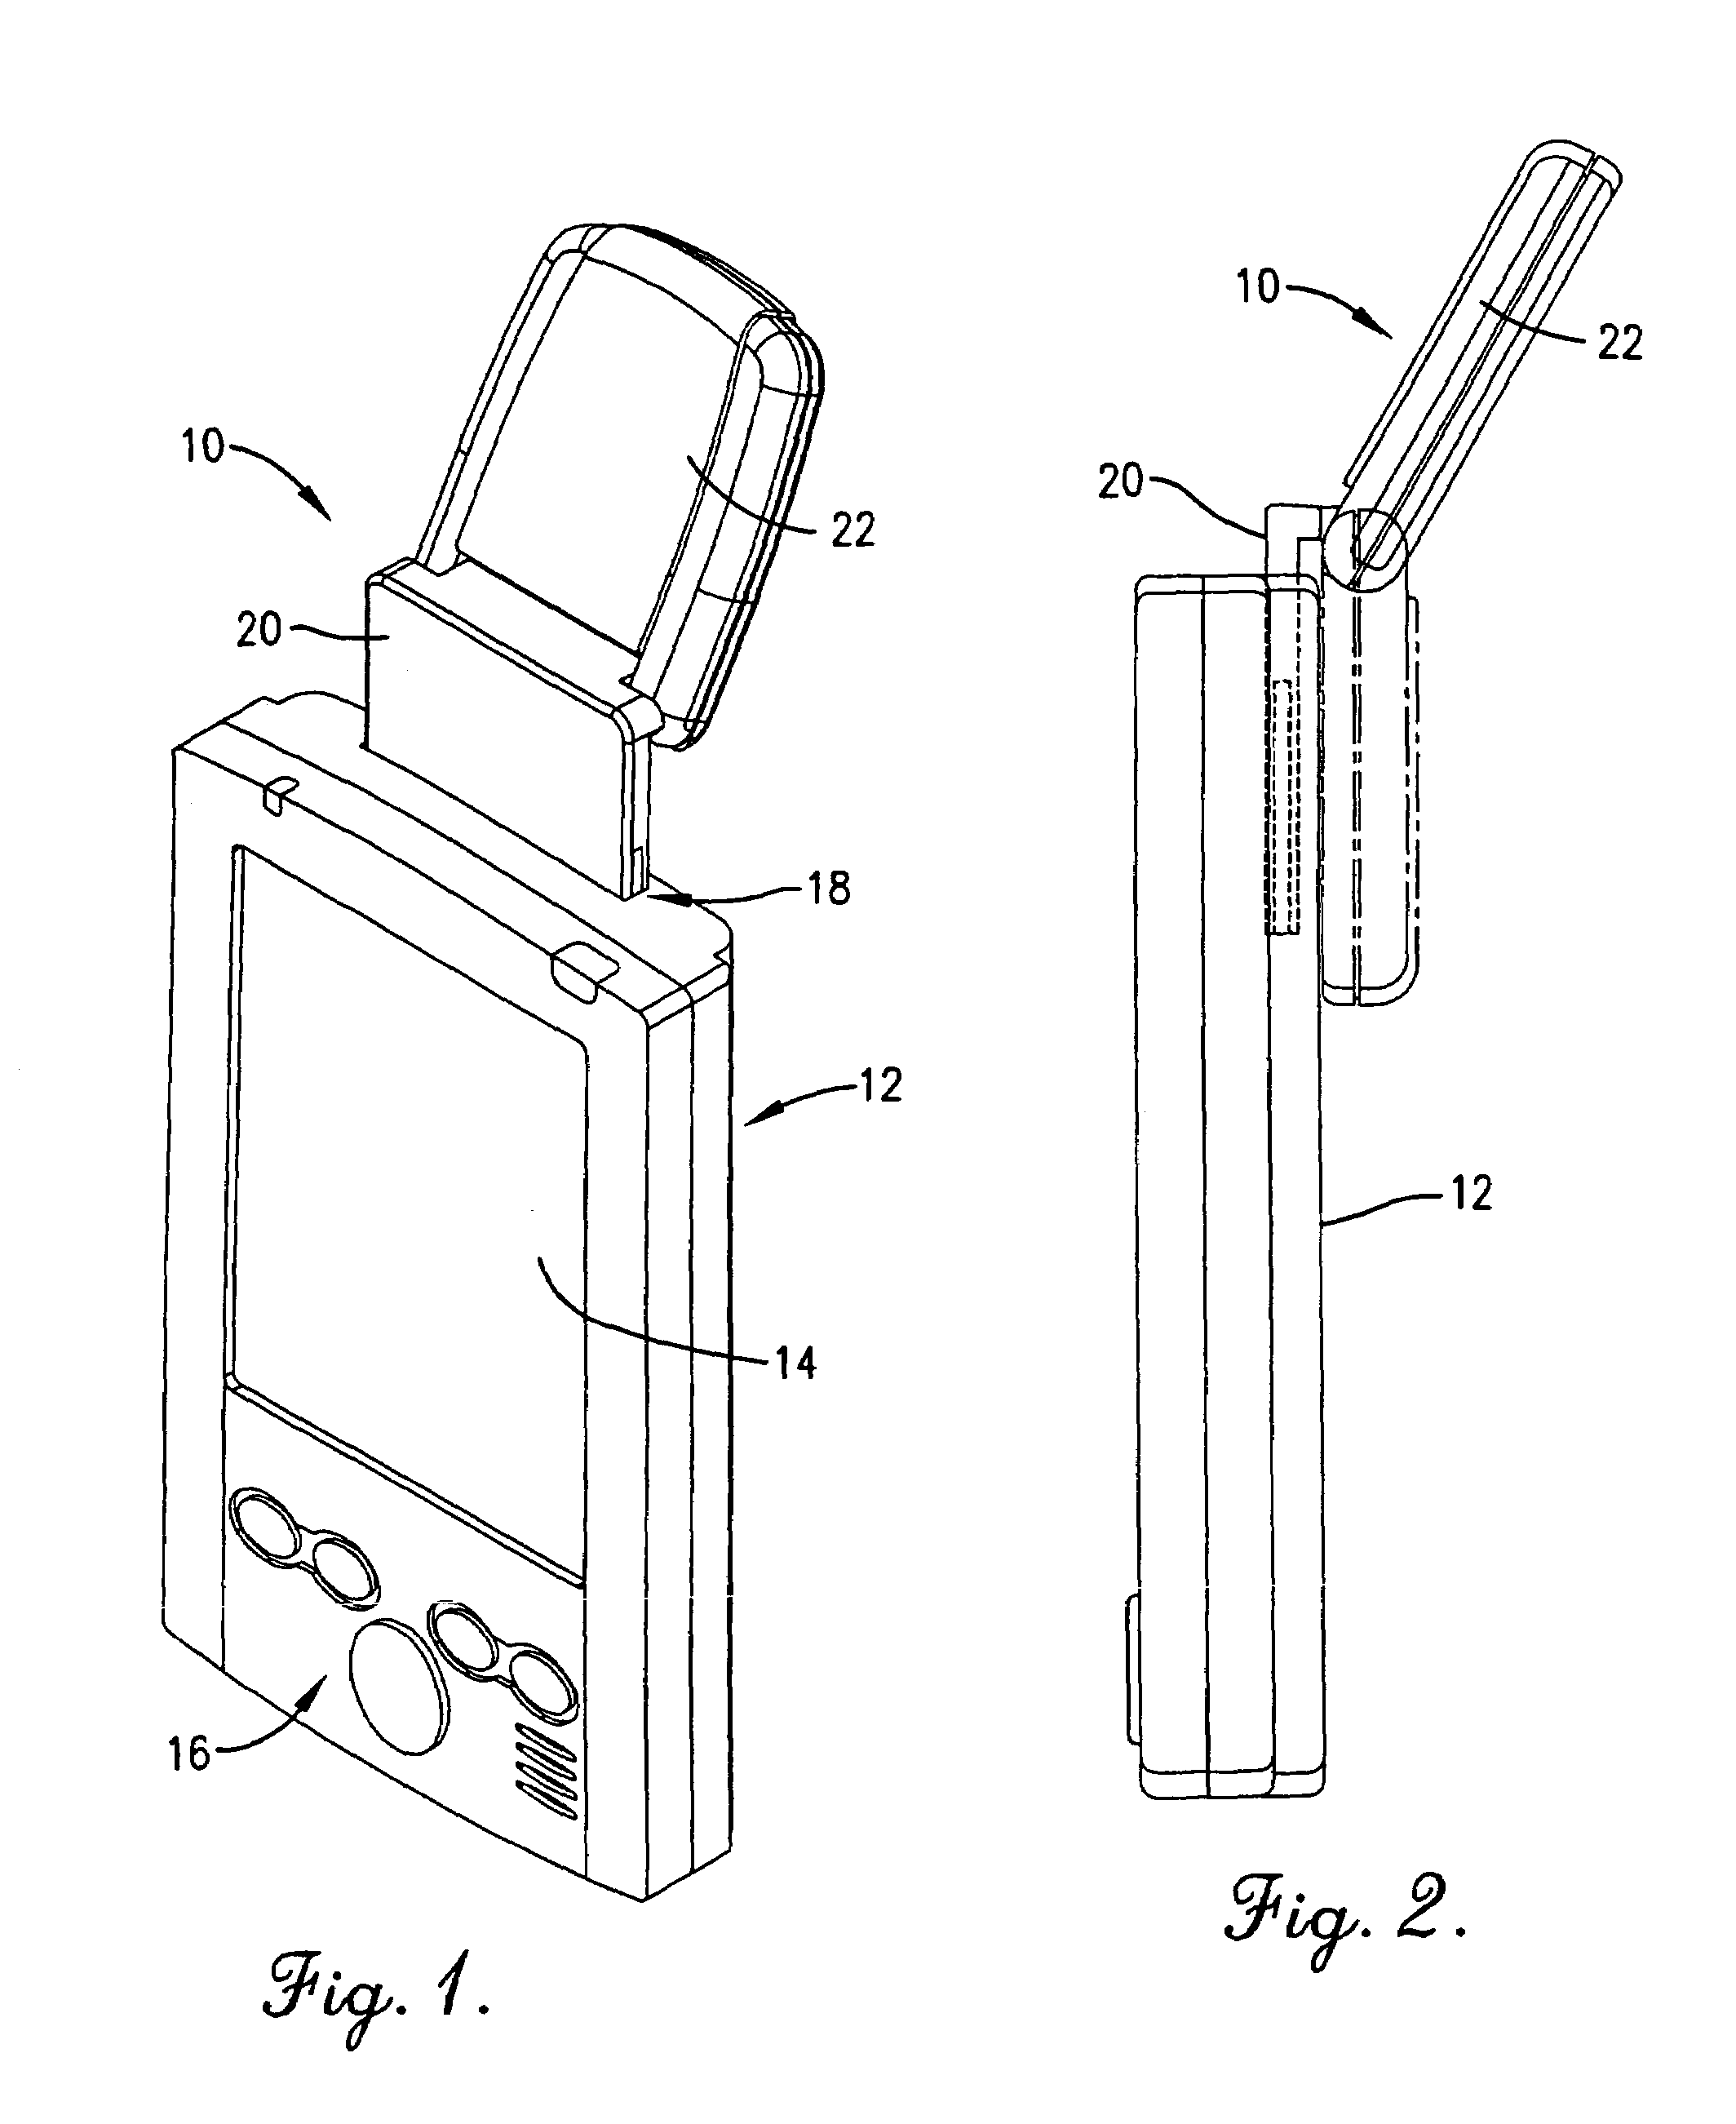 Navigation apparatus for coupling with an expansion slot of a portable, handheld computing device